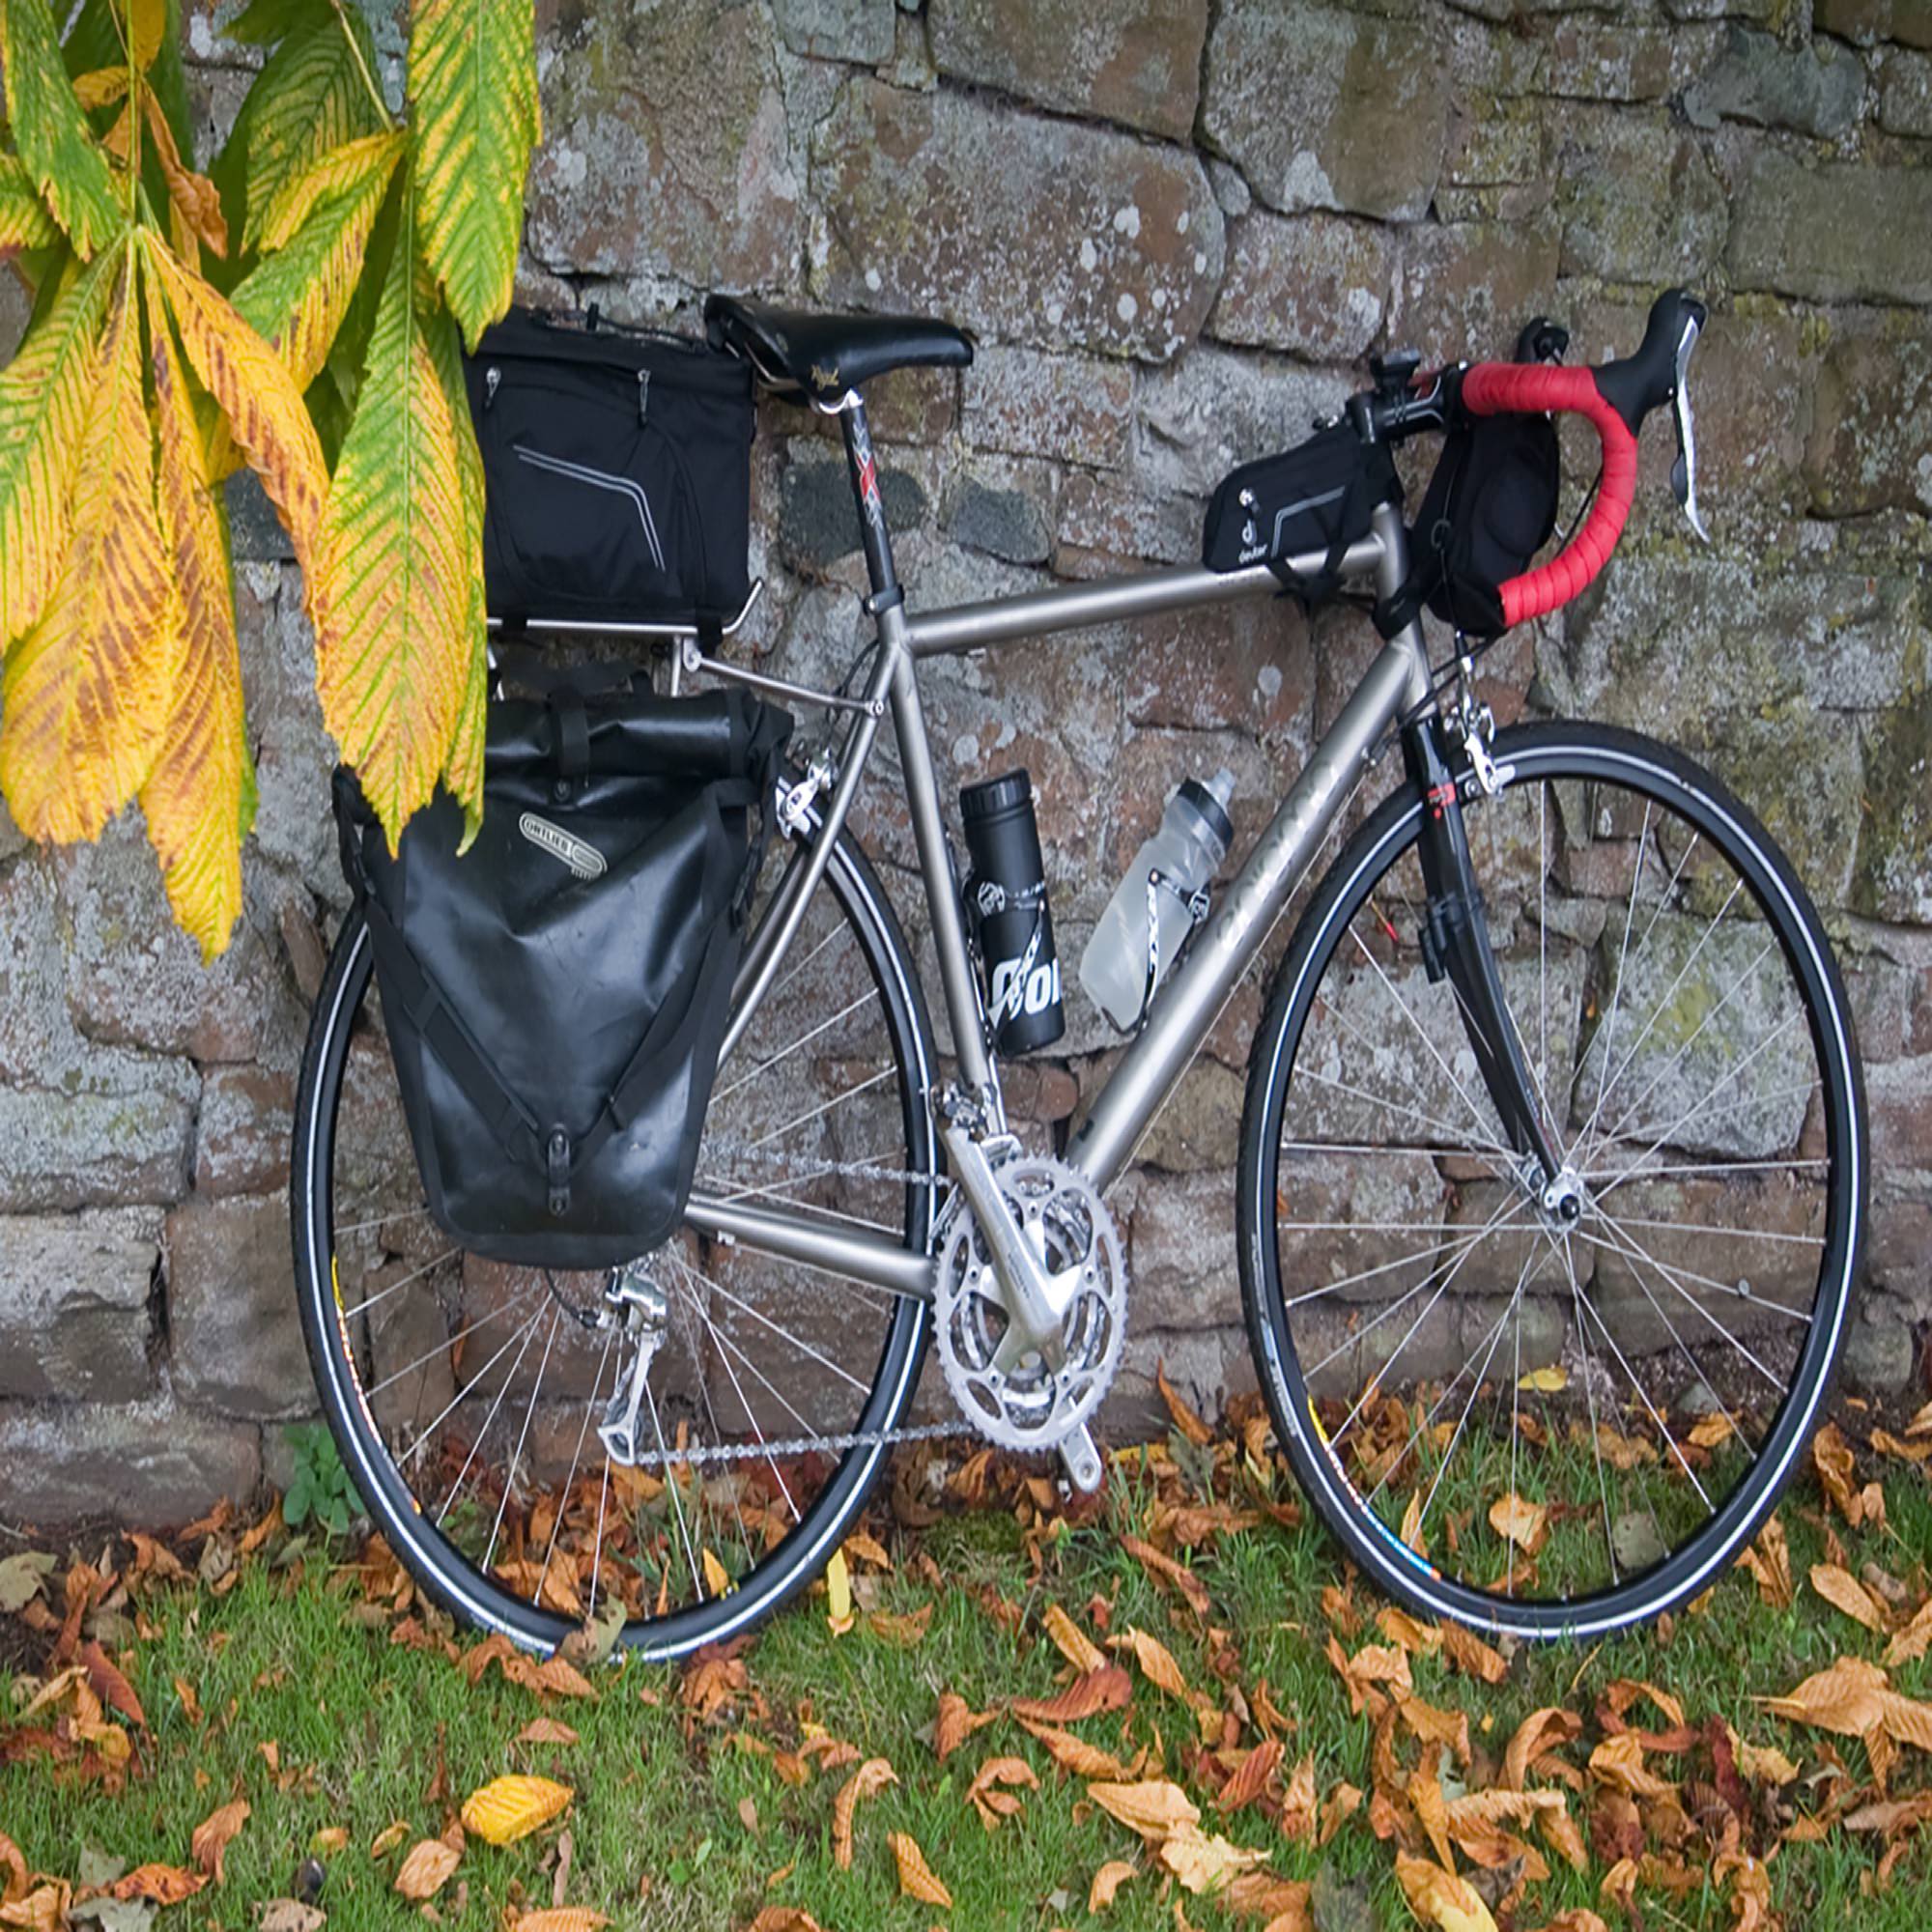 Panniers – and a few other bags for things like camera, valuables and snacks (Image by Richard Barrett)